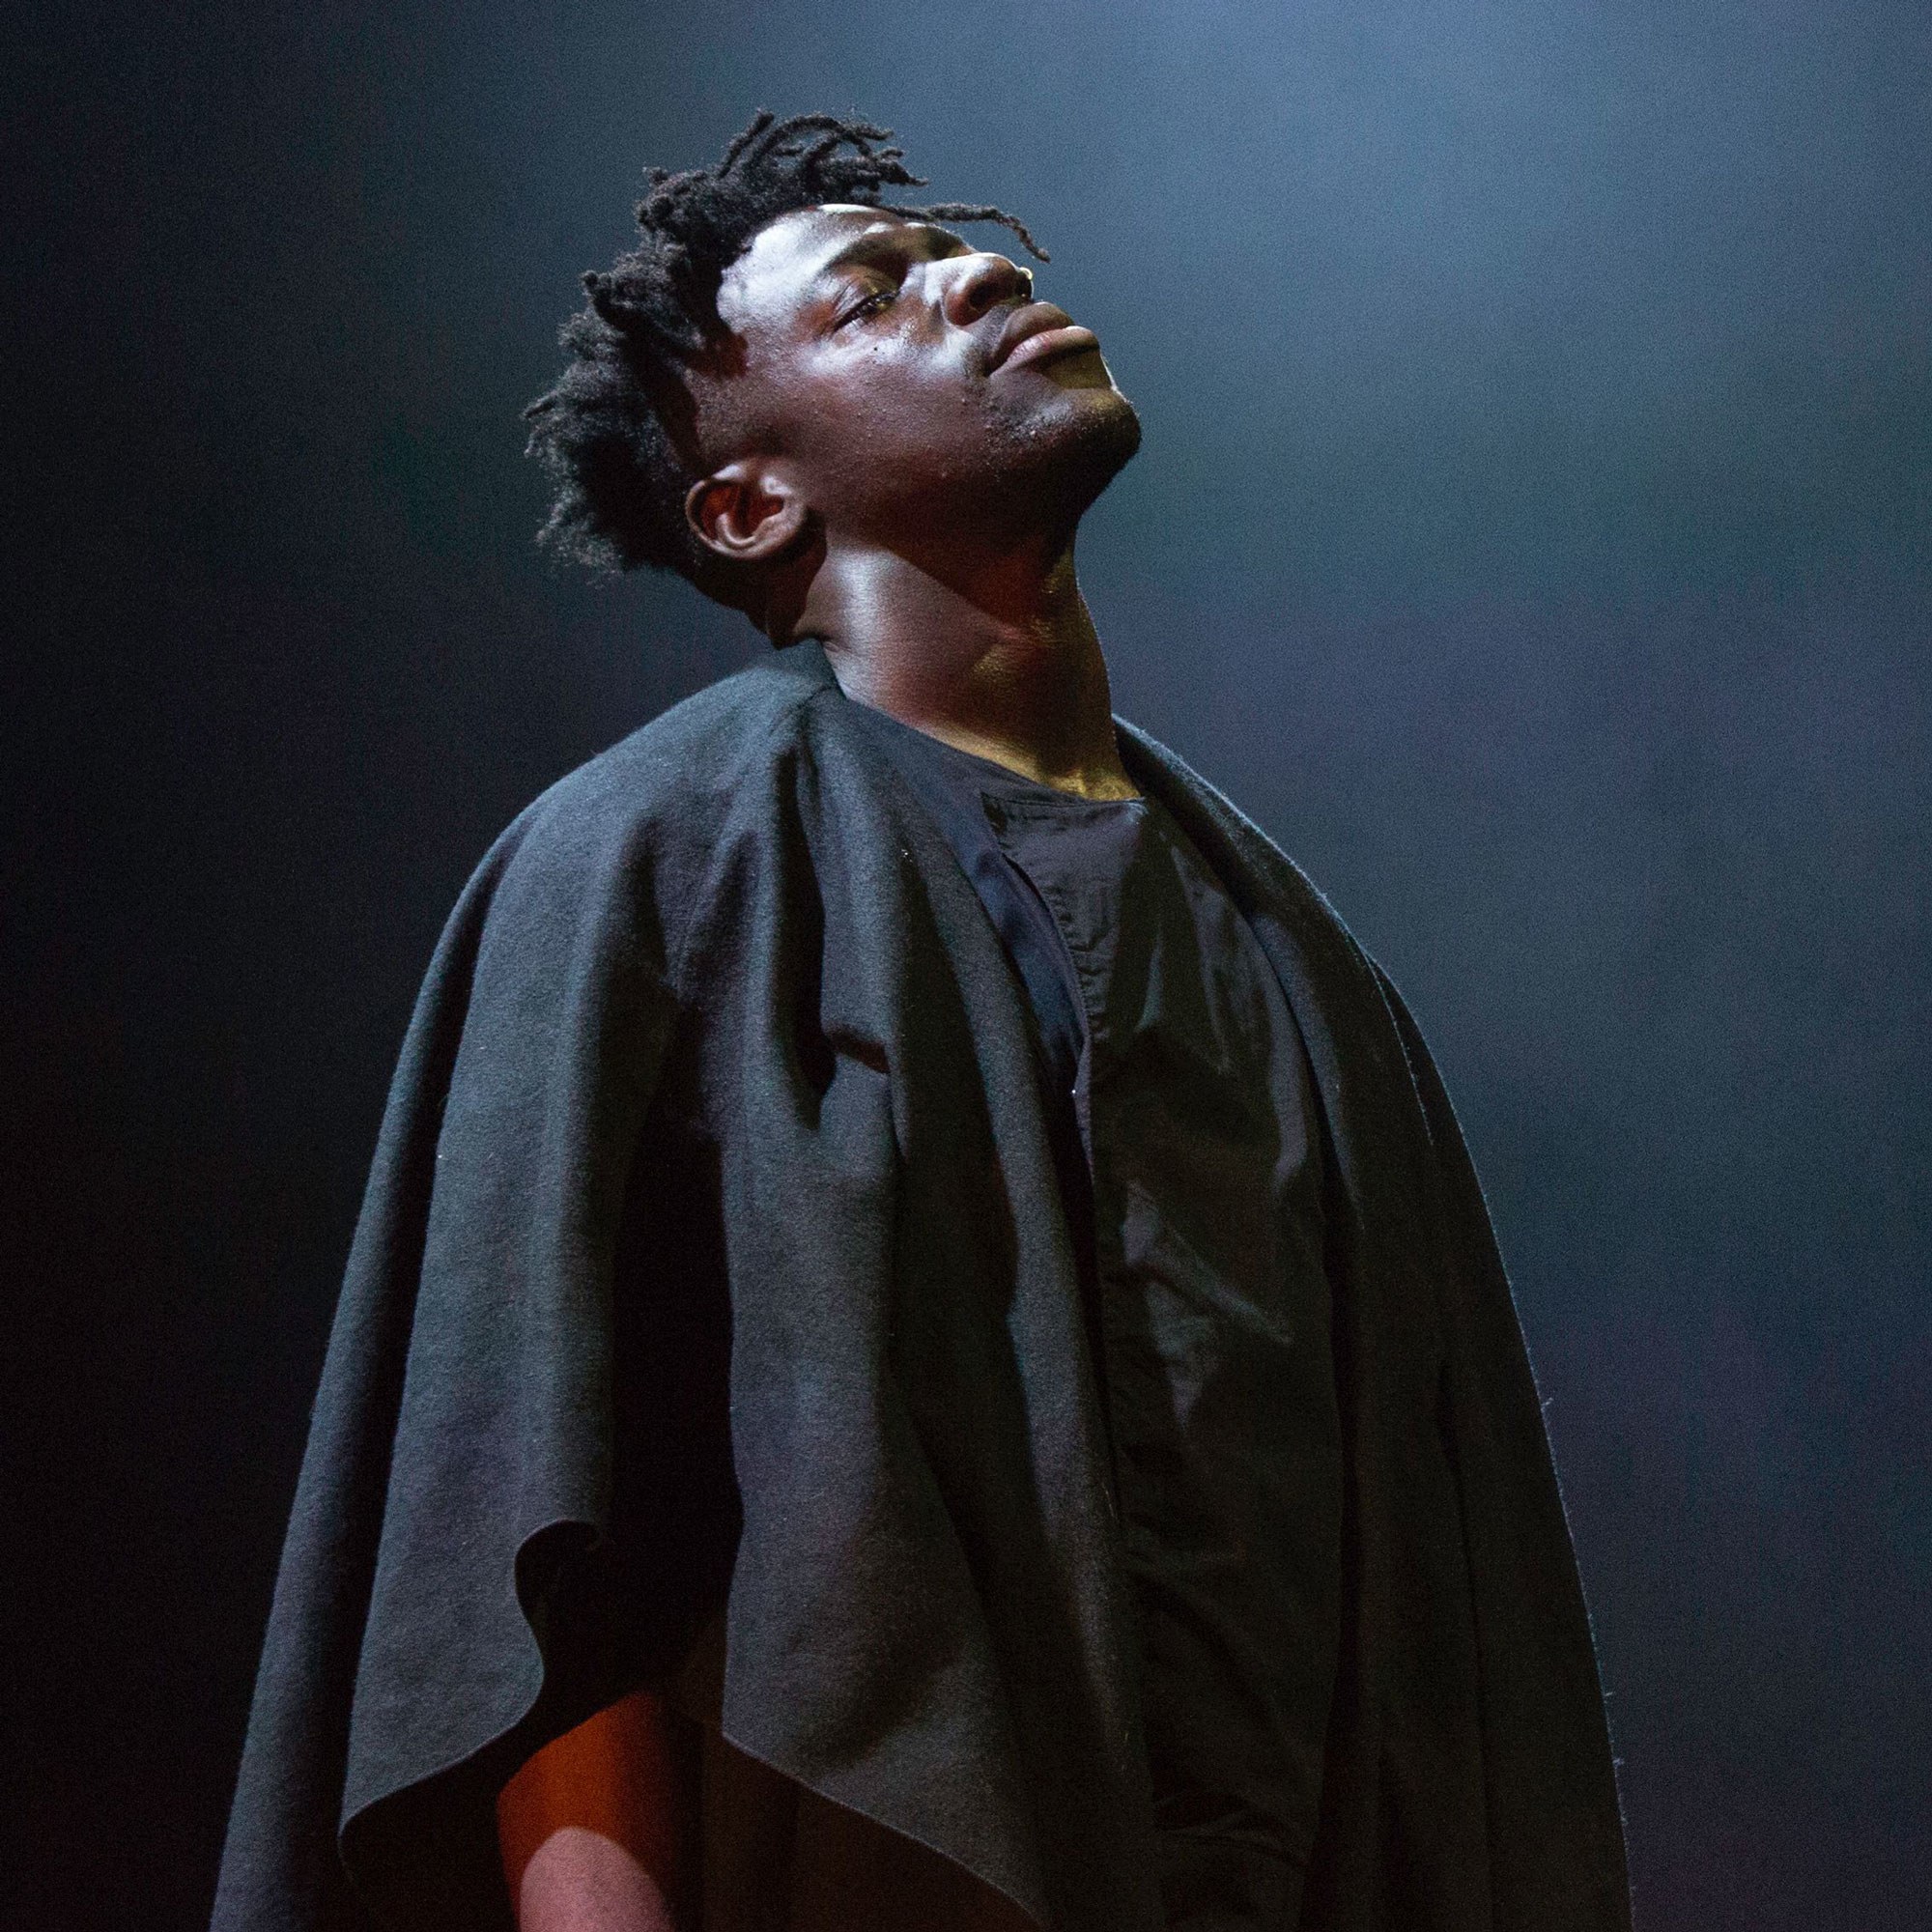 Meaning of Doomed by Moses Sumney